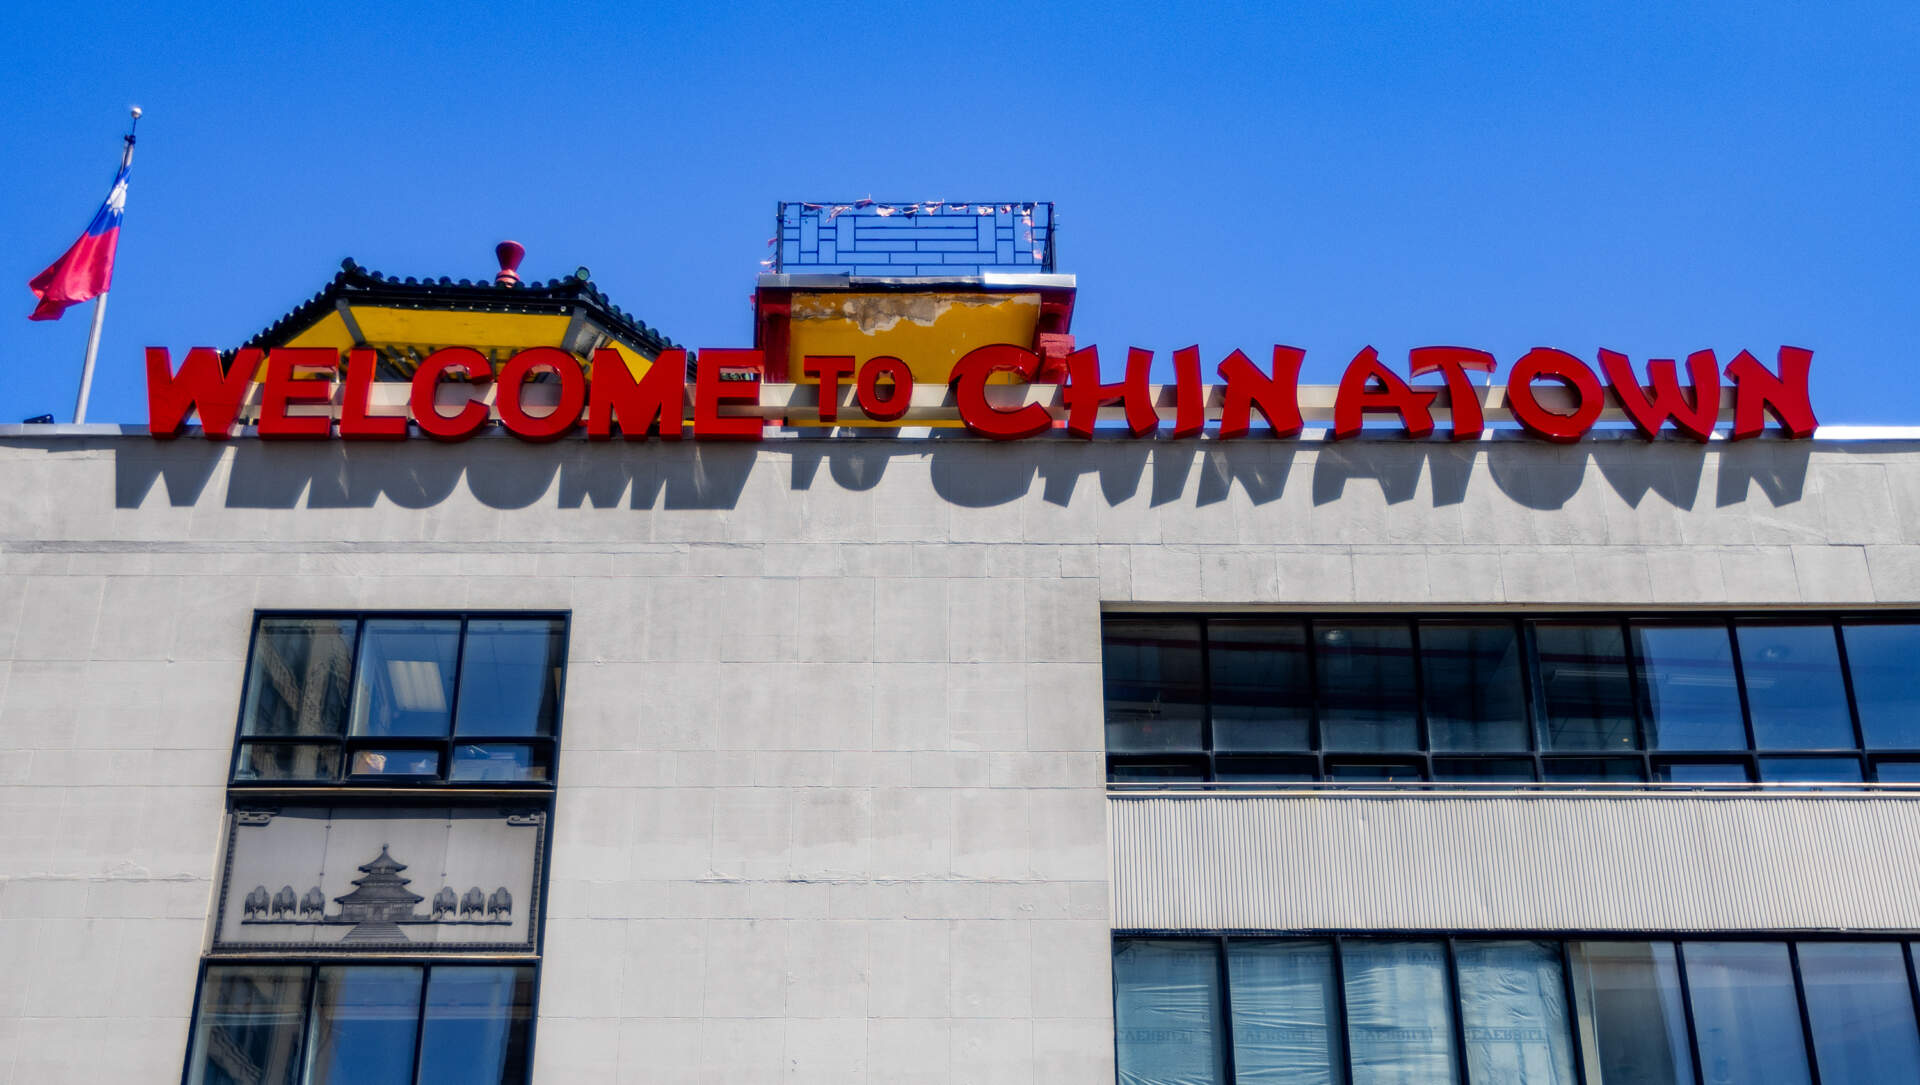 The sign welcoming people to Chinatown sits atop the building at 20 Hudson St. (Jesse Costa/WBUR)